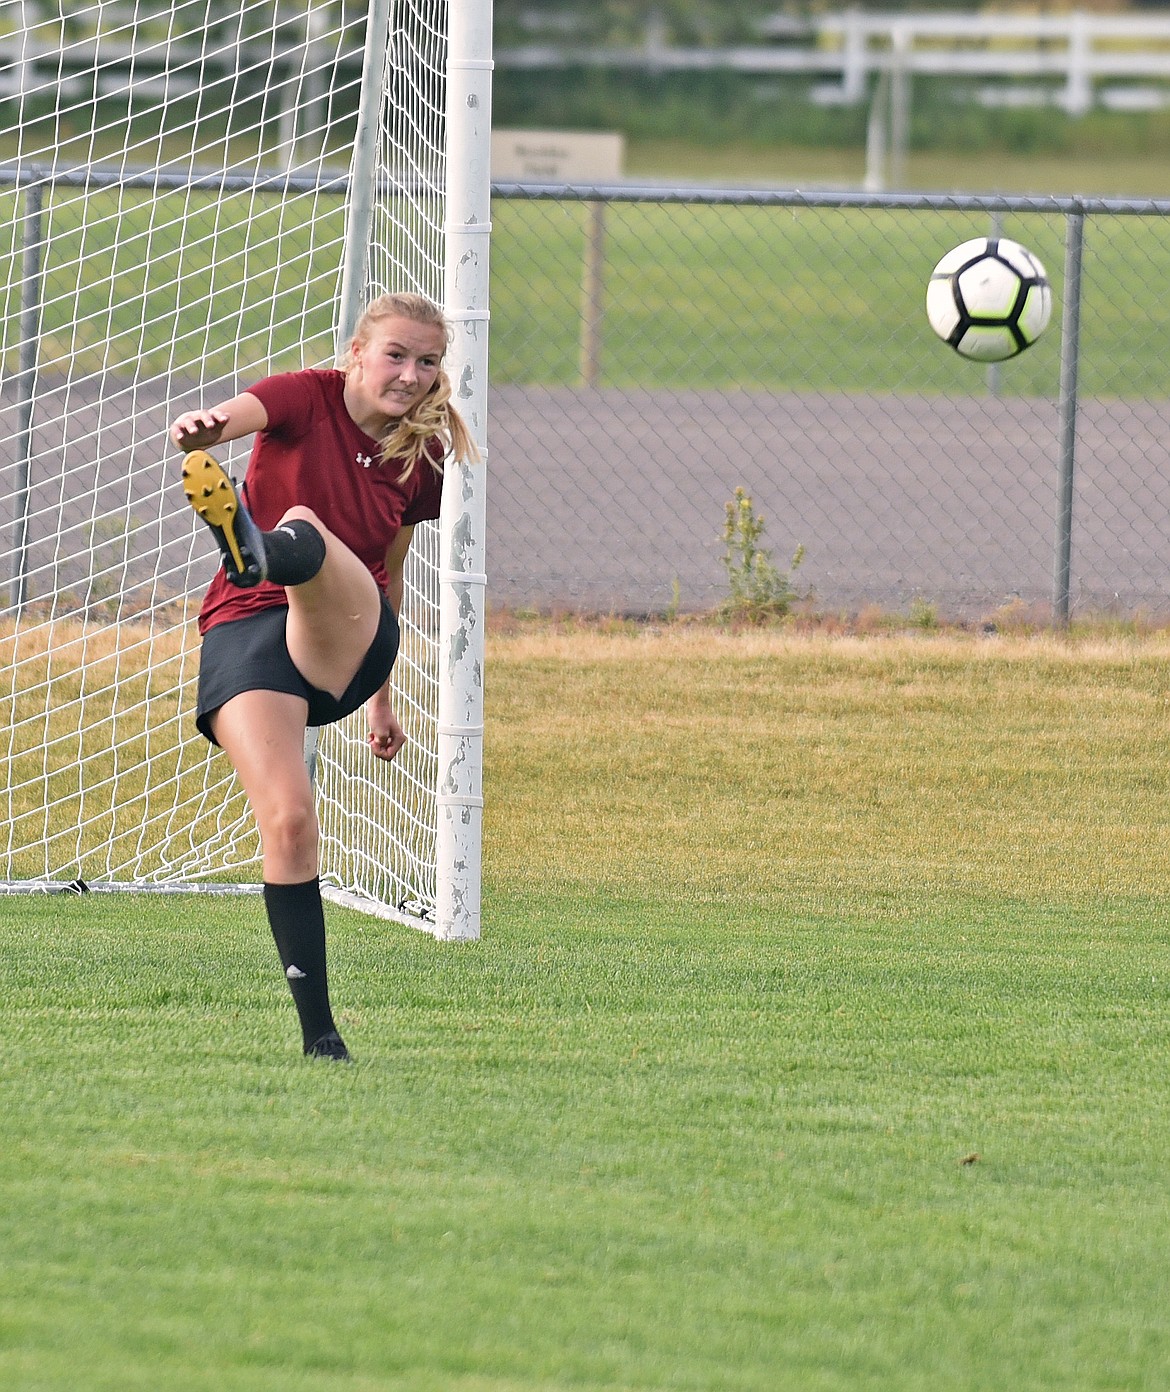 Whitefish Lady Bulldog goalkeeper Sami Galbraith kicks a long ball during a fit test at practice on Aug. 20 at Smith Fields. (Whitney England/Whitefish Pilot)